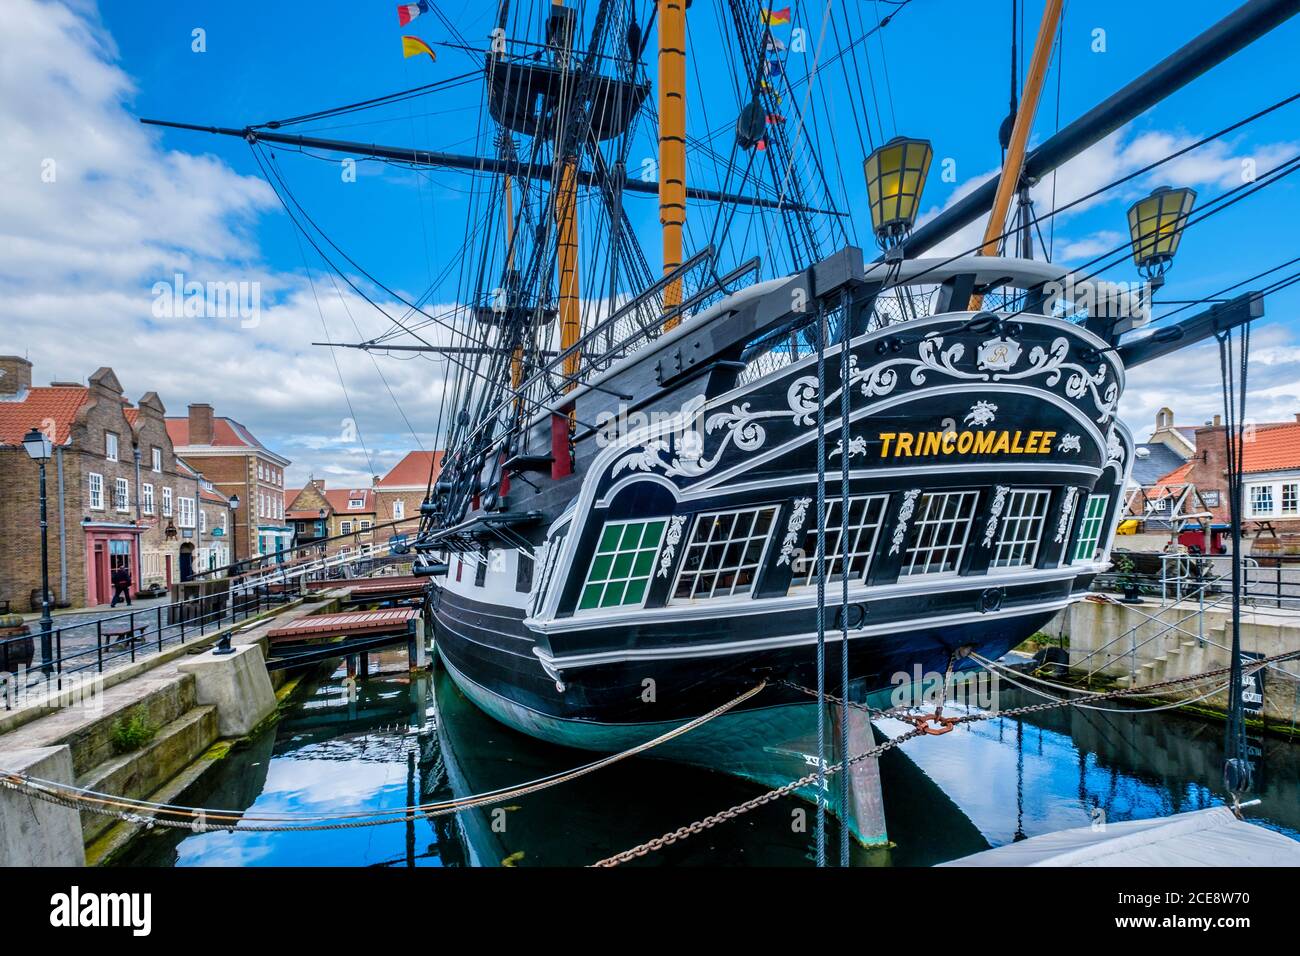 HMS Trincomalee is a Royal Navy Leda-class sailing frigate built in 1816-17. Stock Photo